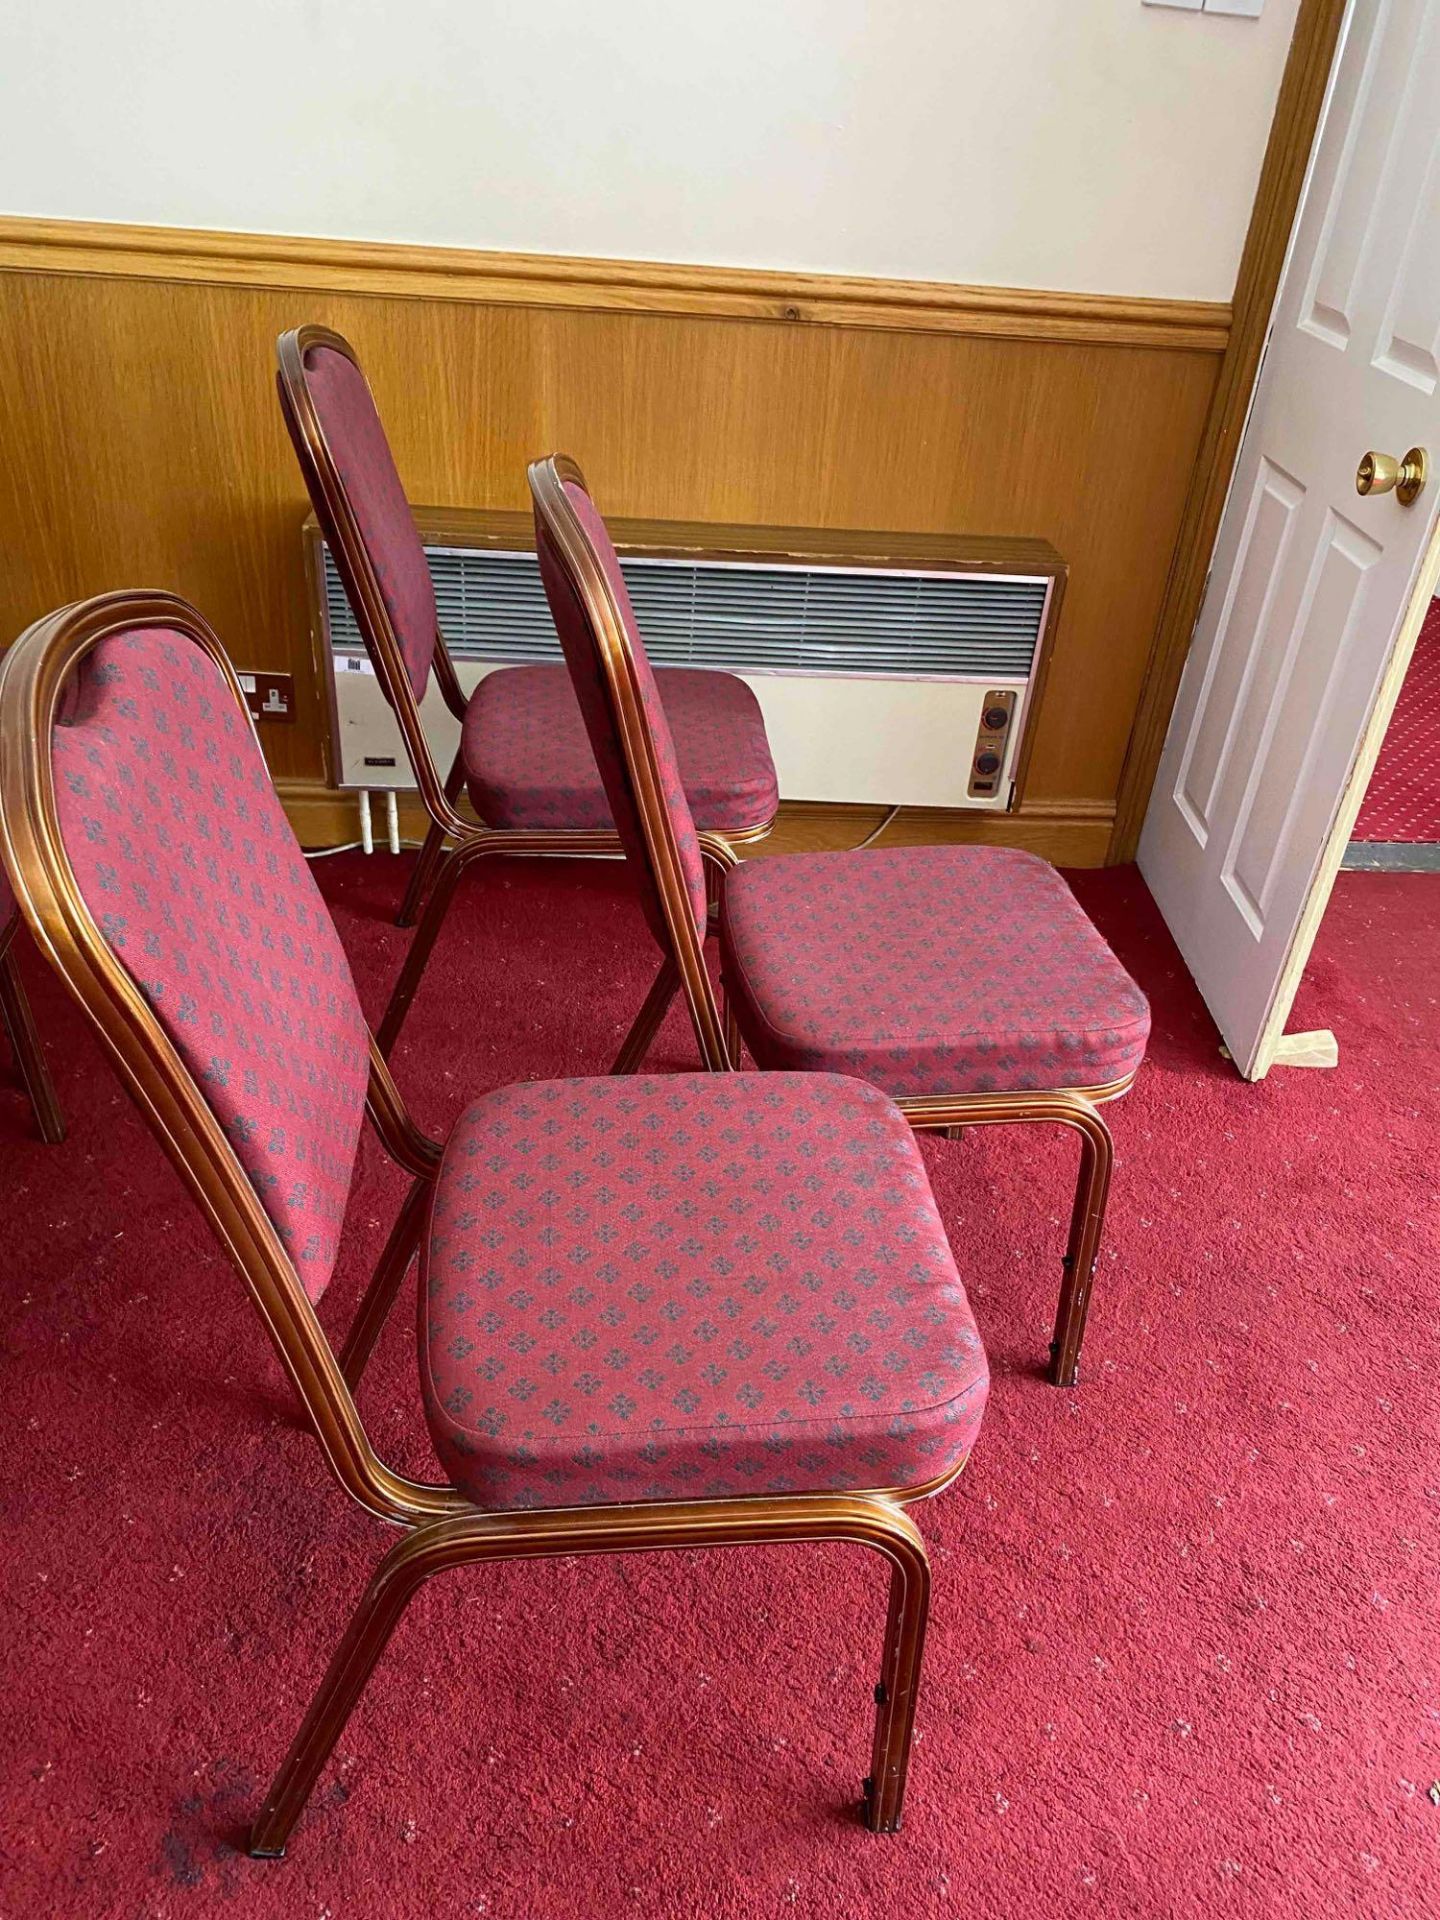 Burgundy burgess conference chair (30 matching) (Meeting Room - Slipper Room) - Image 2 of 3